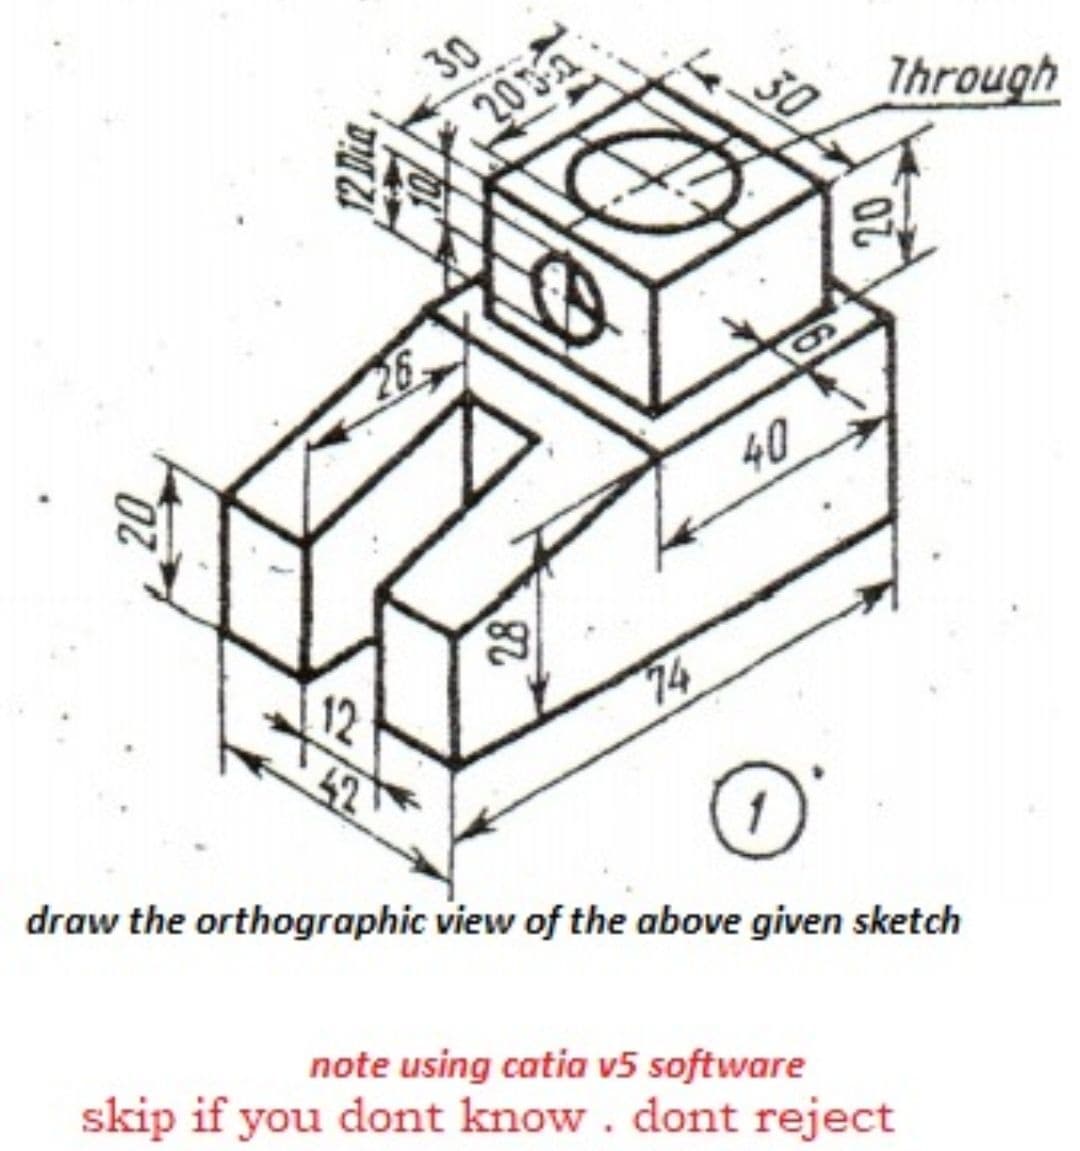 30
203
Through
30
26
40
28
74
draw the orthographic view of the above given sketch
note using catia v5 software
skip if you dont know. dont reject
20
